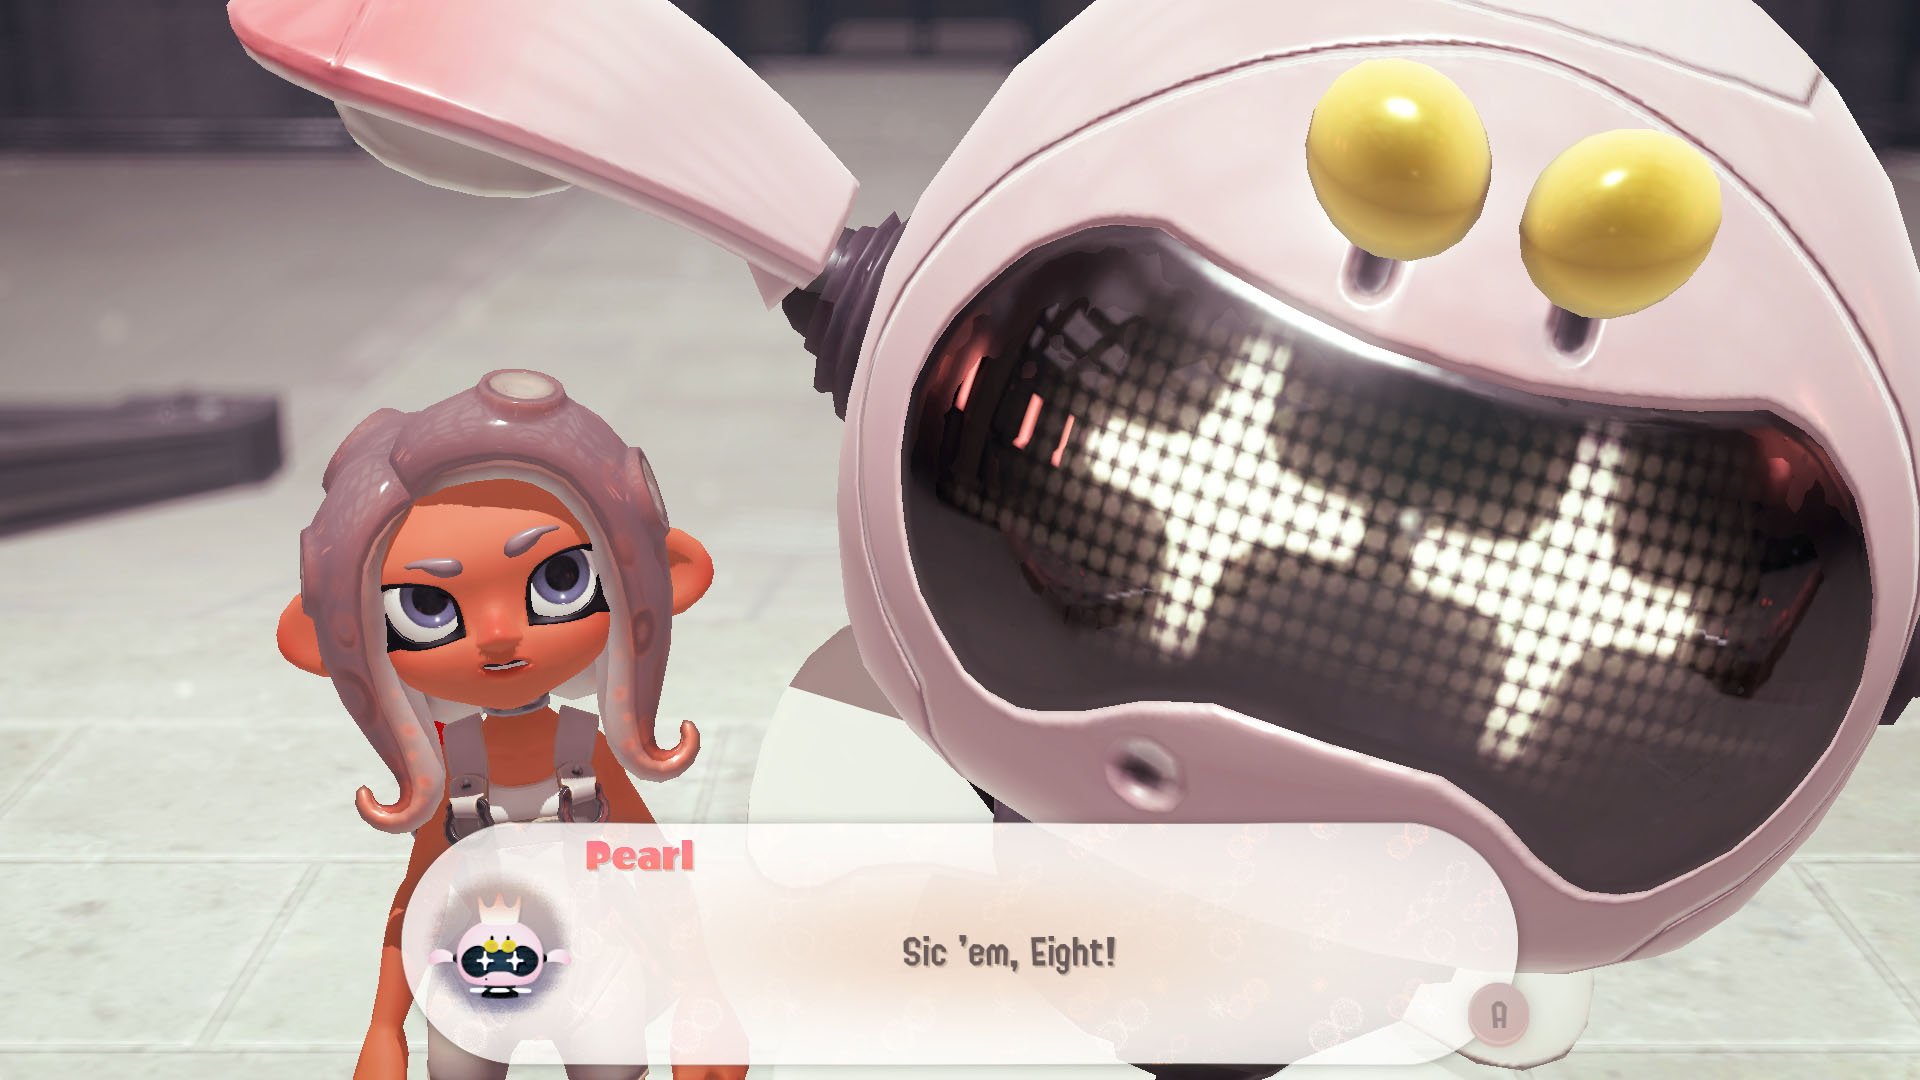 Splatoon 3 is as good as ever, with improvements all over, Hands-on  preview